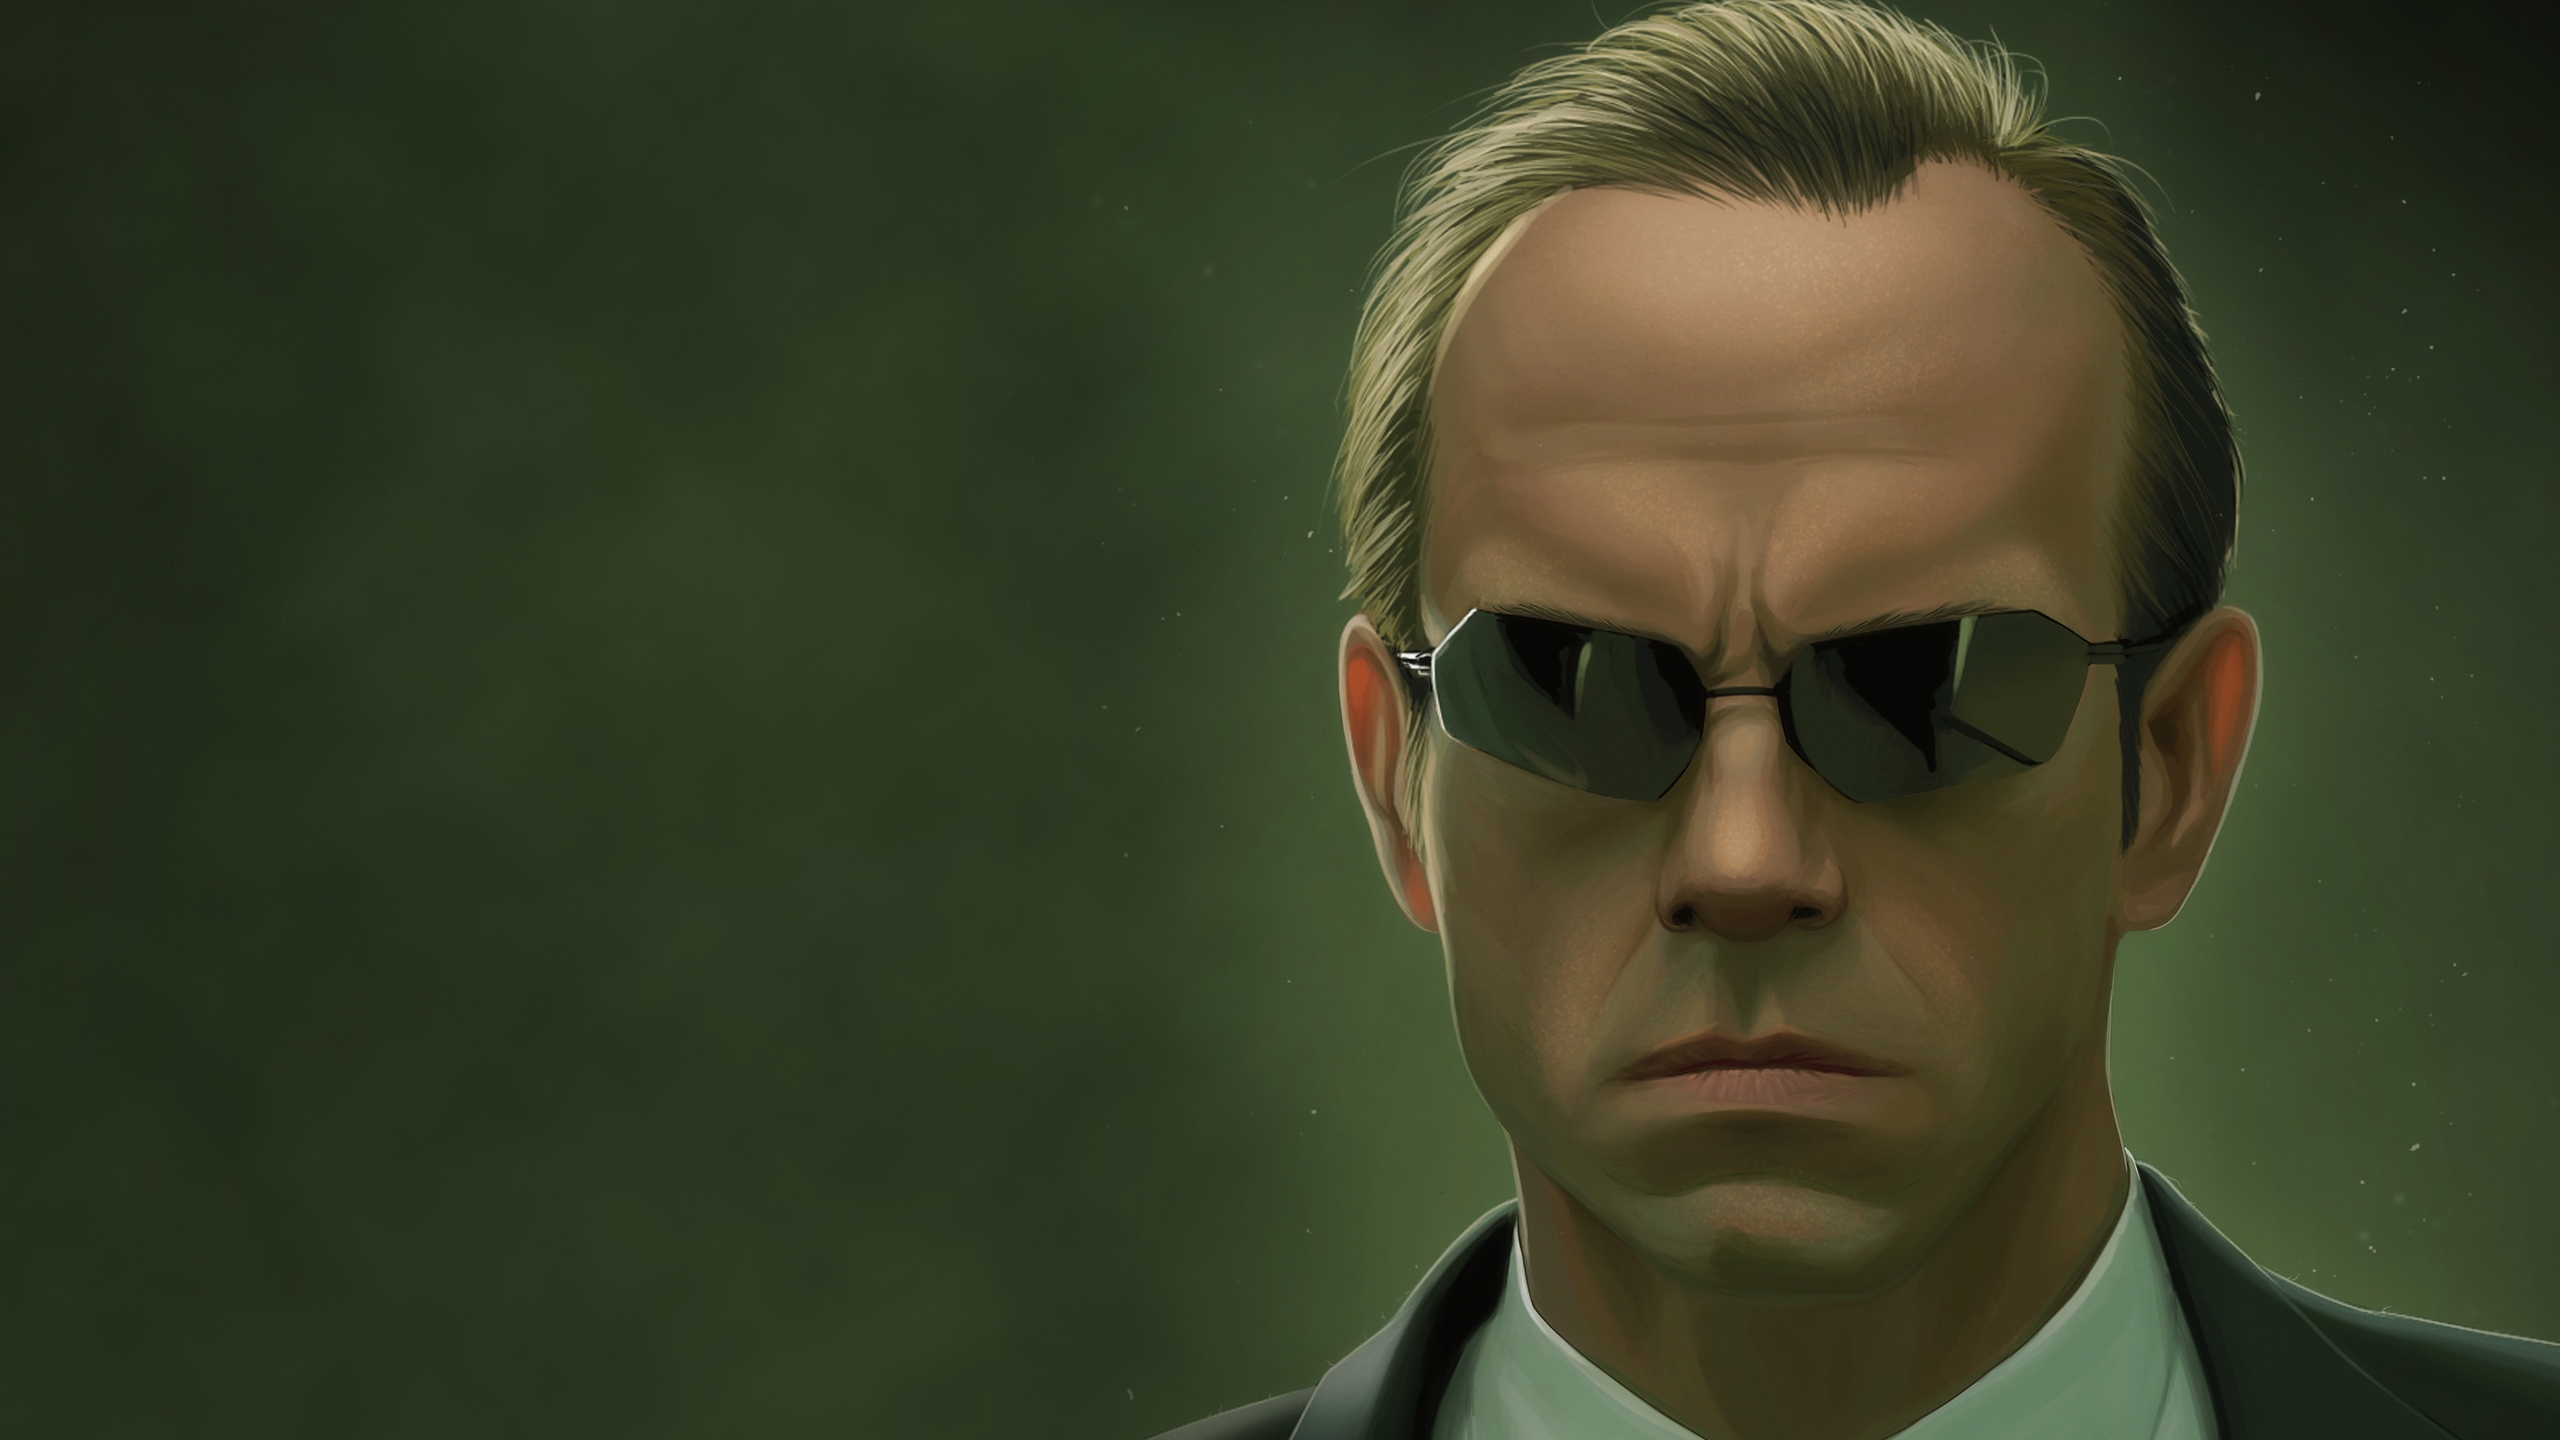 The Matrix Agent Smith for 2560x1440 HDTV resolution